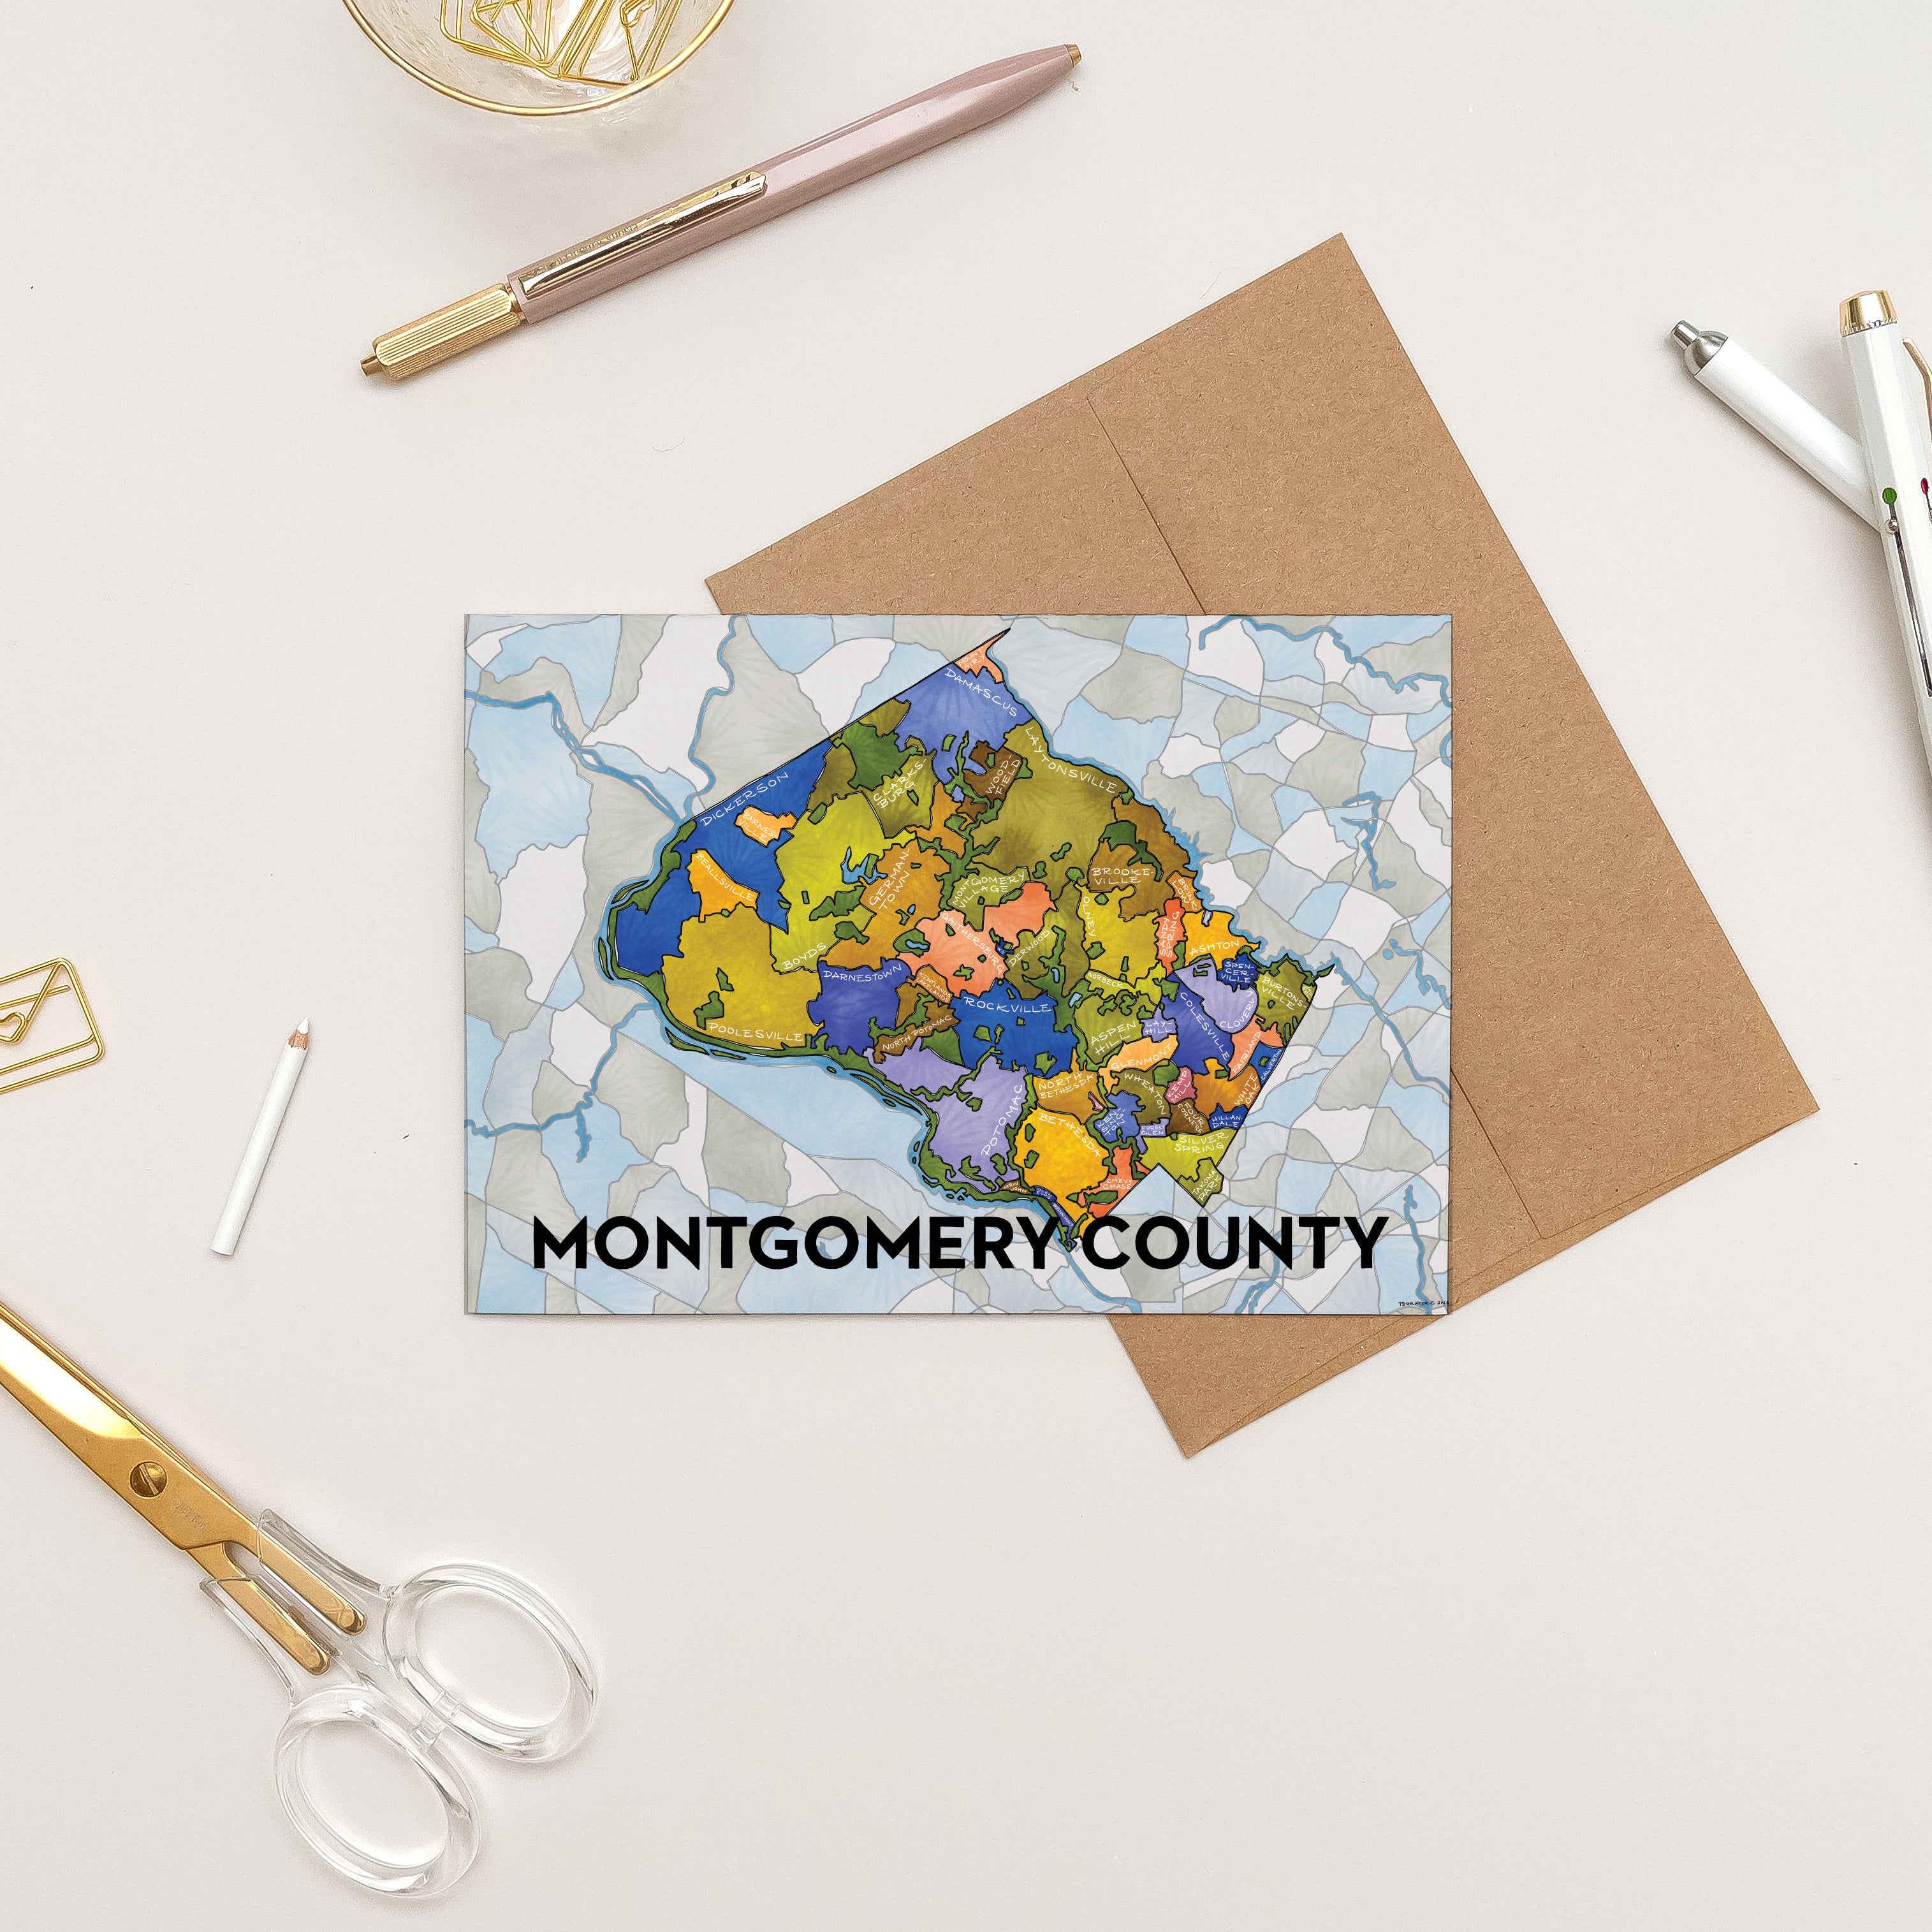 Montgomery County Greeting Card